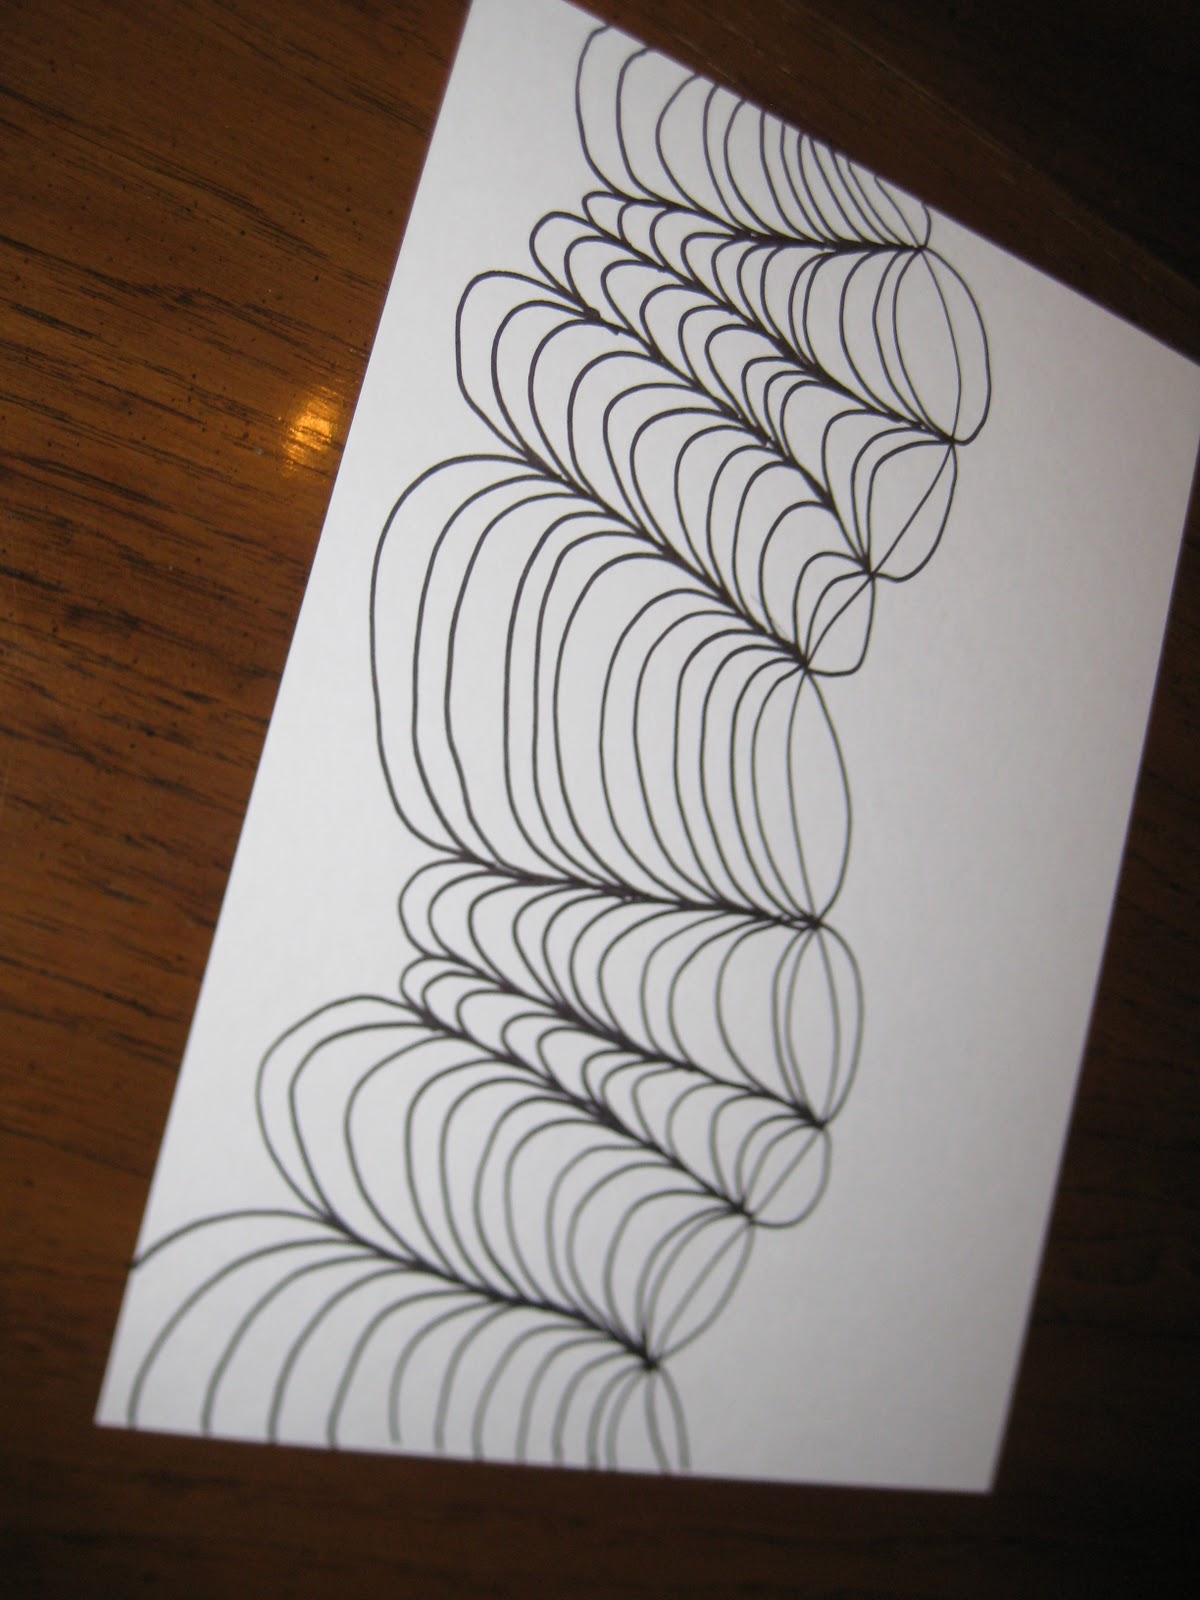 Heaps of Laundry: Funky Line Designs with Shading